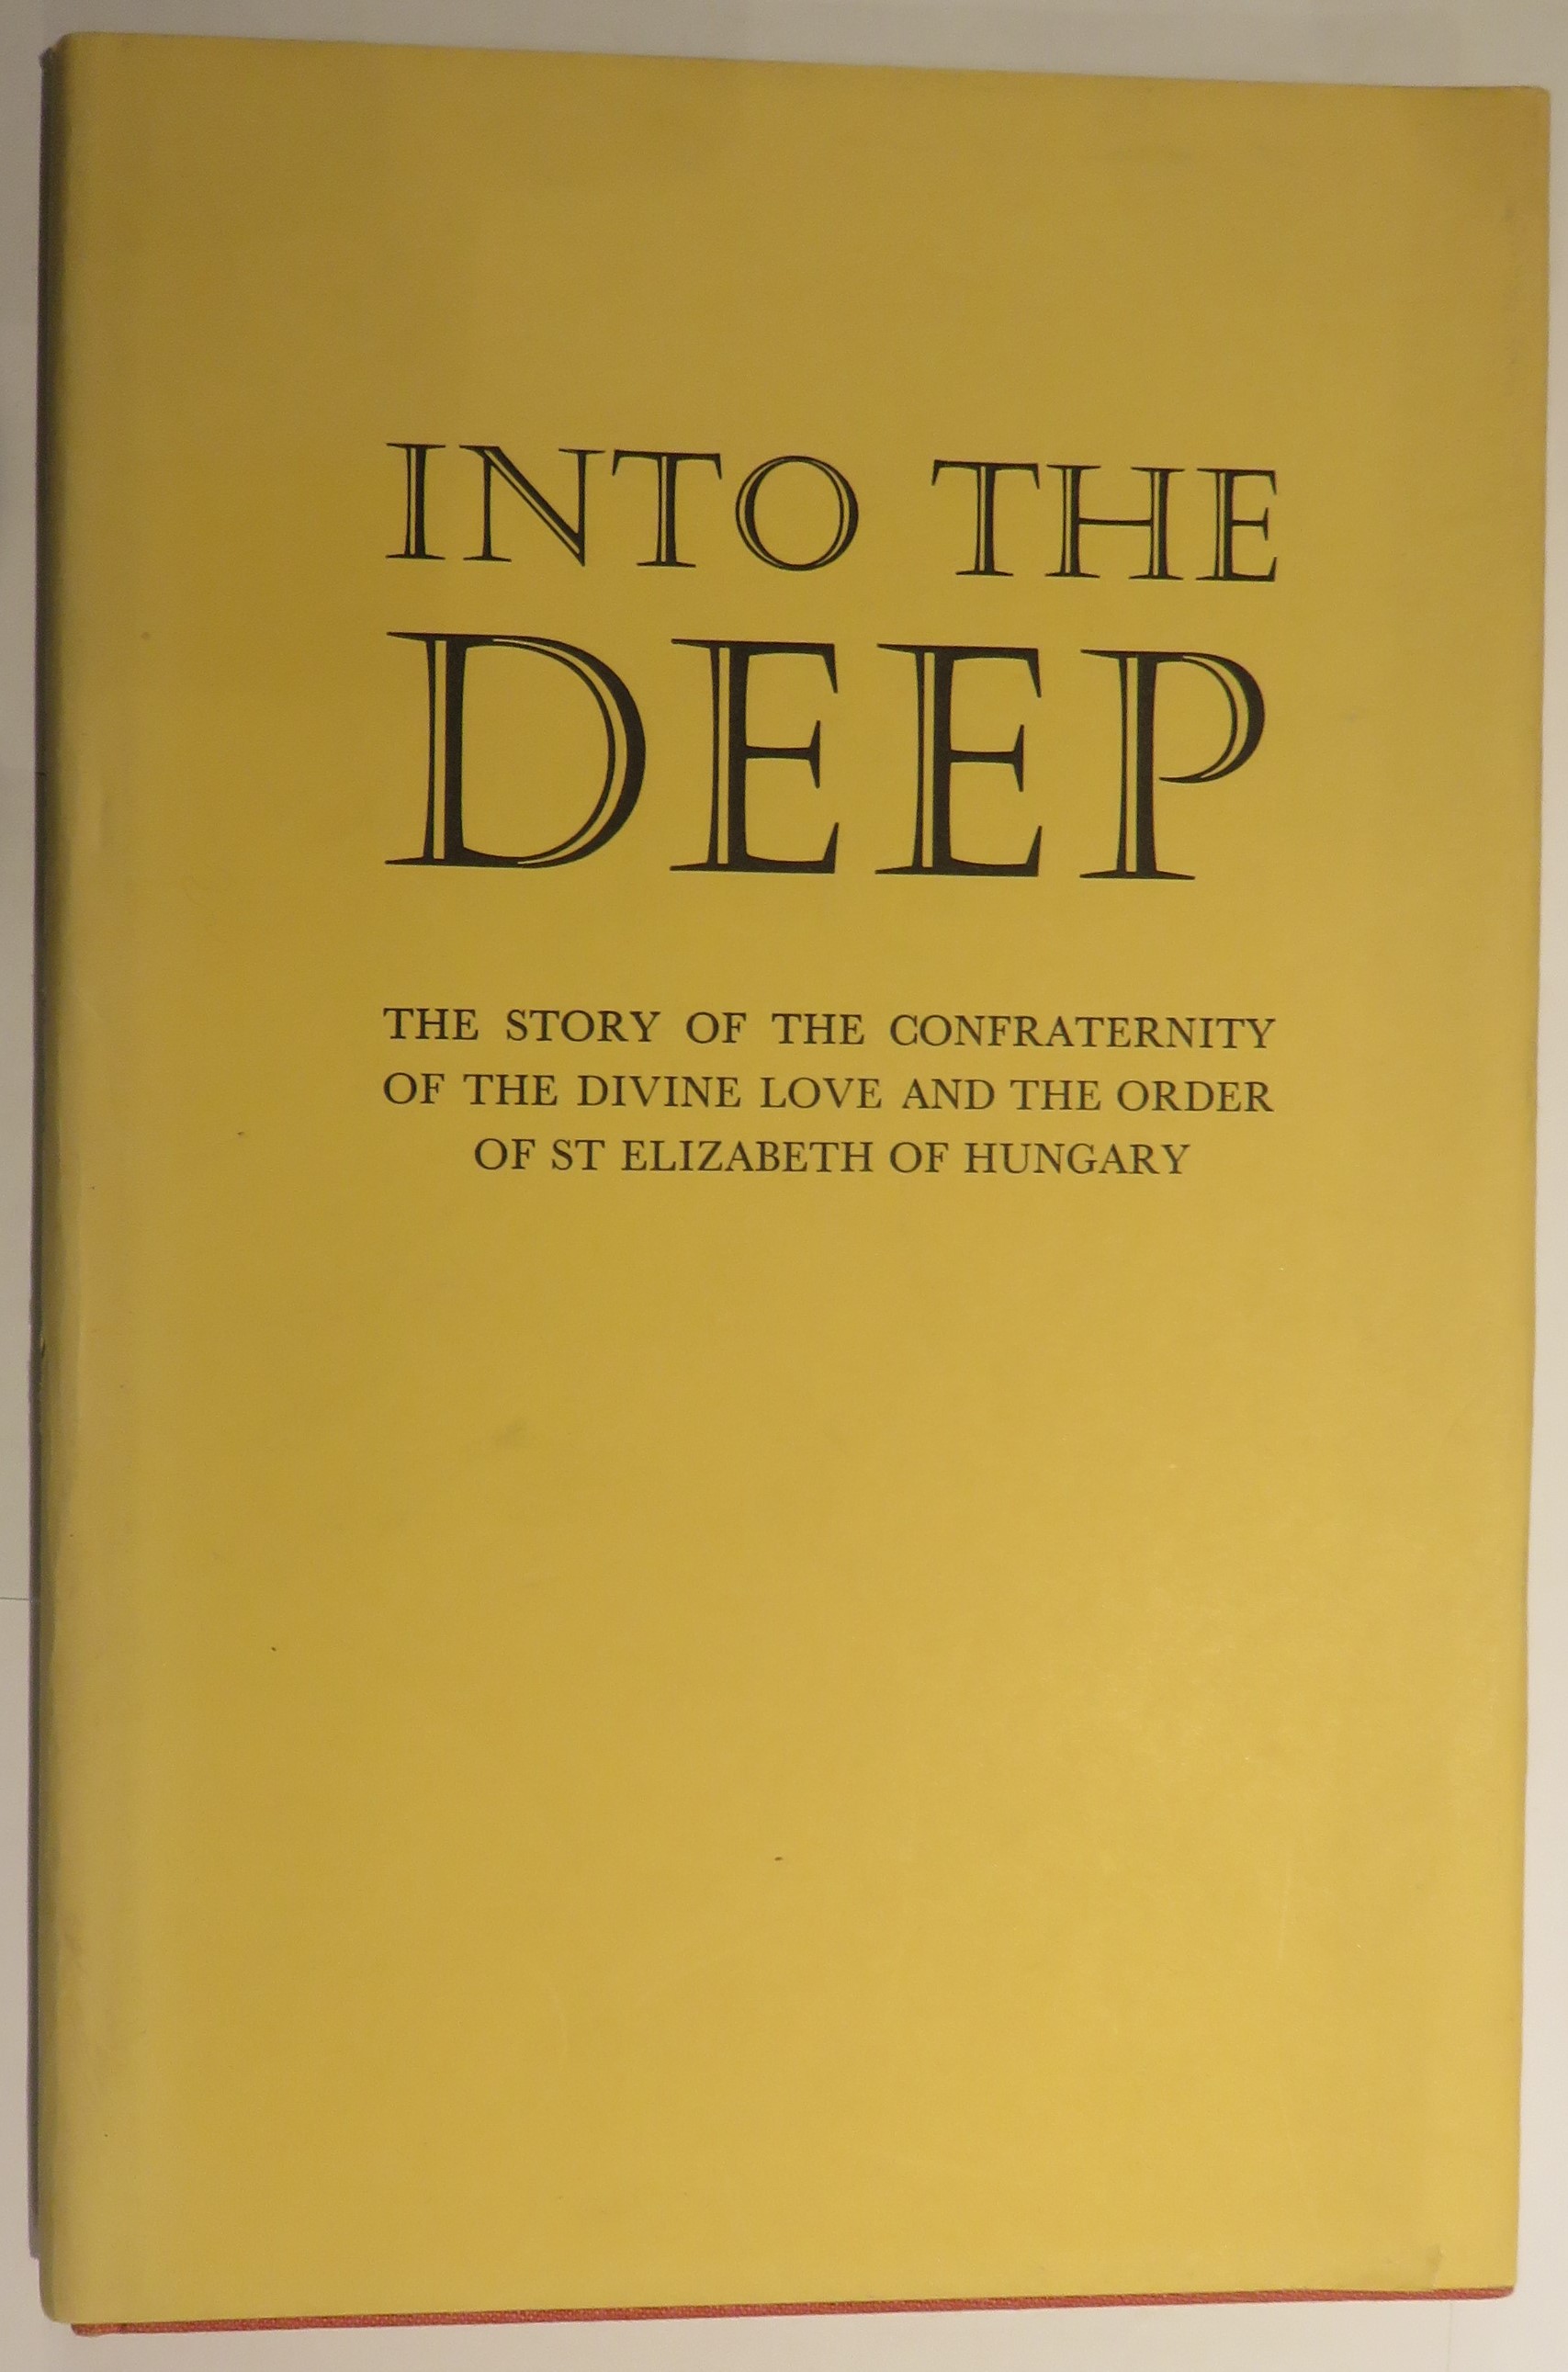 Into The Deep: The story of the confraternity of the divine love and the order of St Elizabeth of Hungary